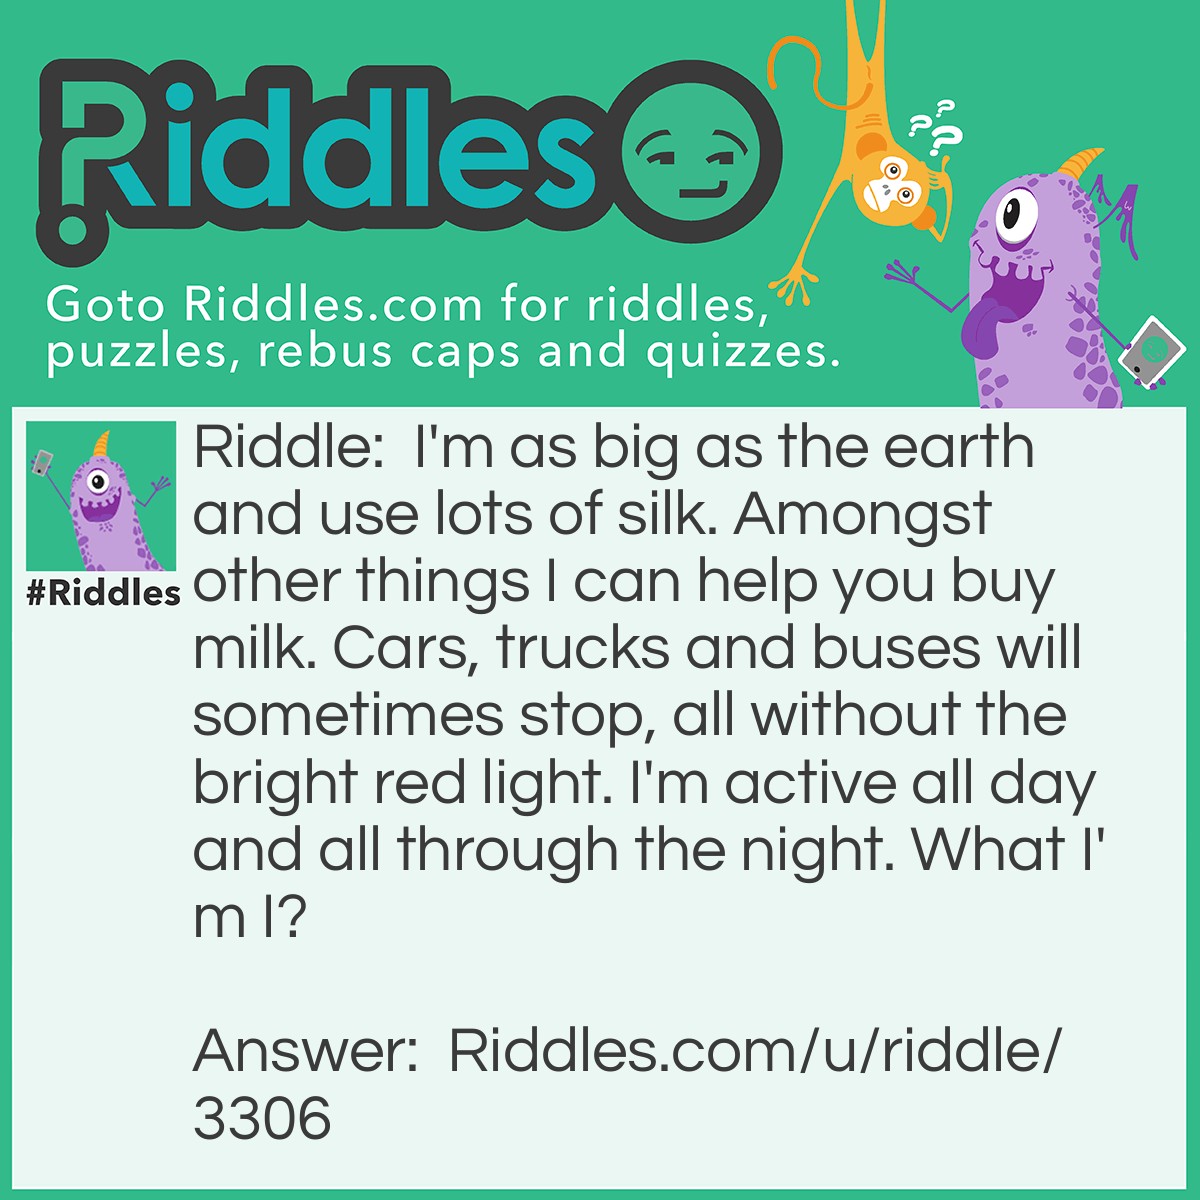 Riddle: I'm as big as the earth and use lots of silk. Amongst other things I can help you buy milk. Cars, trucks and buses will sometimes stop, all without the bright red light. I'm active all day and all through the night. What I'm I? Answer: The World Wide Web.